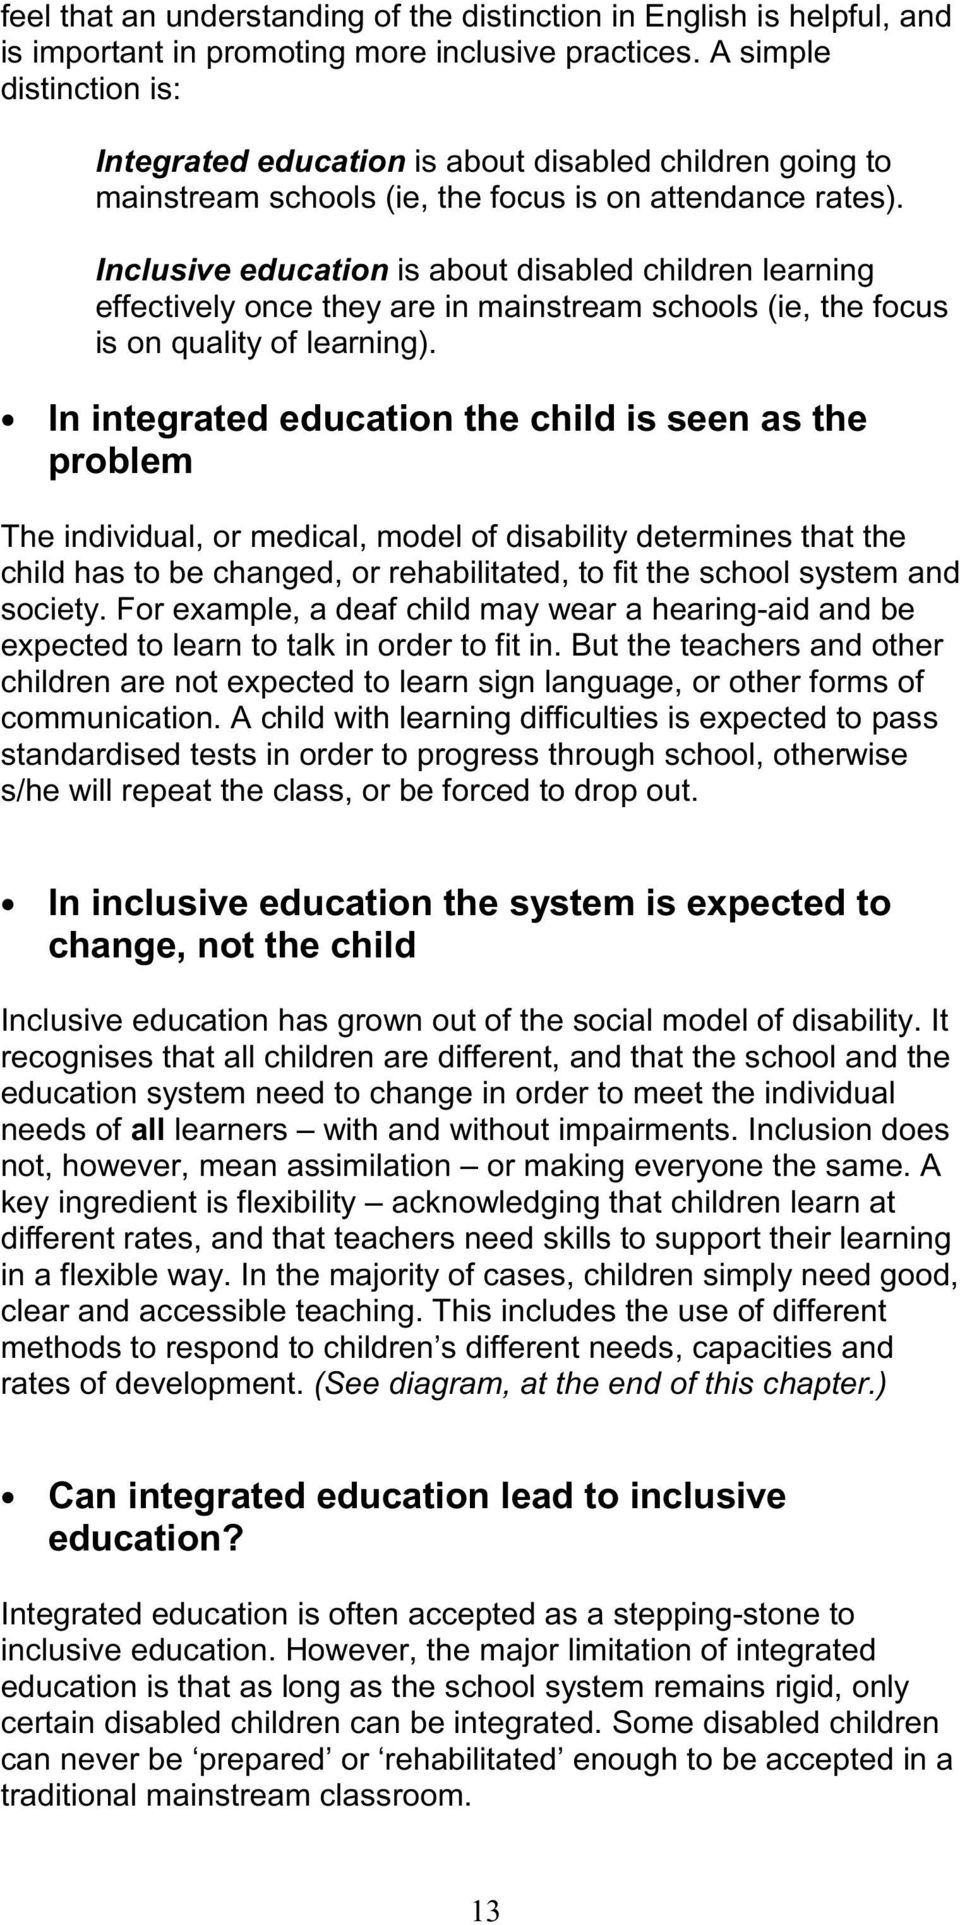 Inclusive education is about disabled children learning effectively once they are in mainstream schools (ie, the focus is on quality of learning).